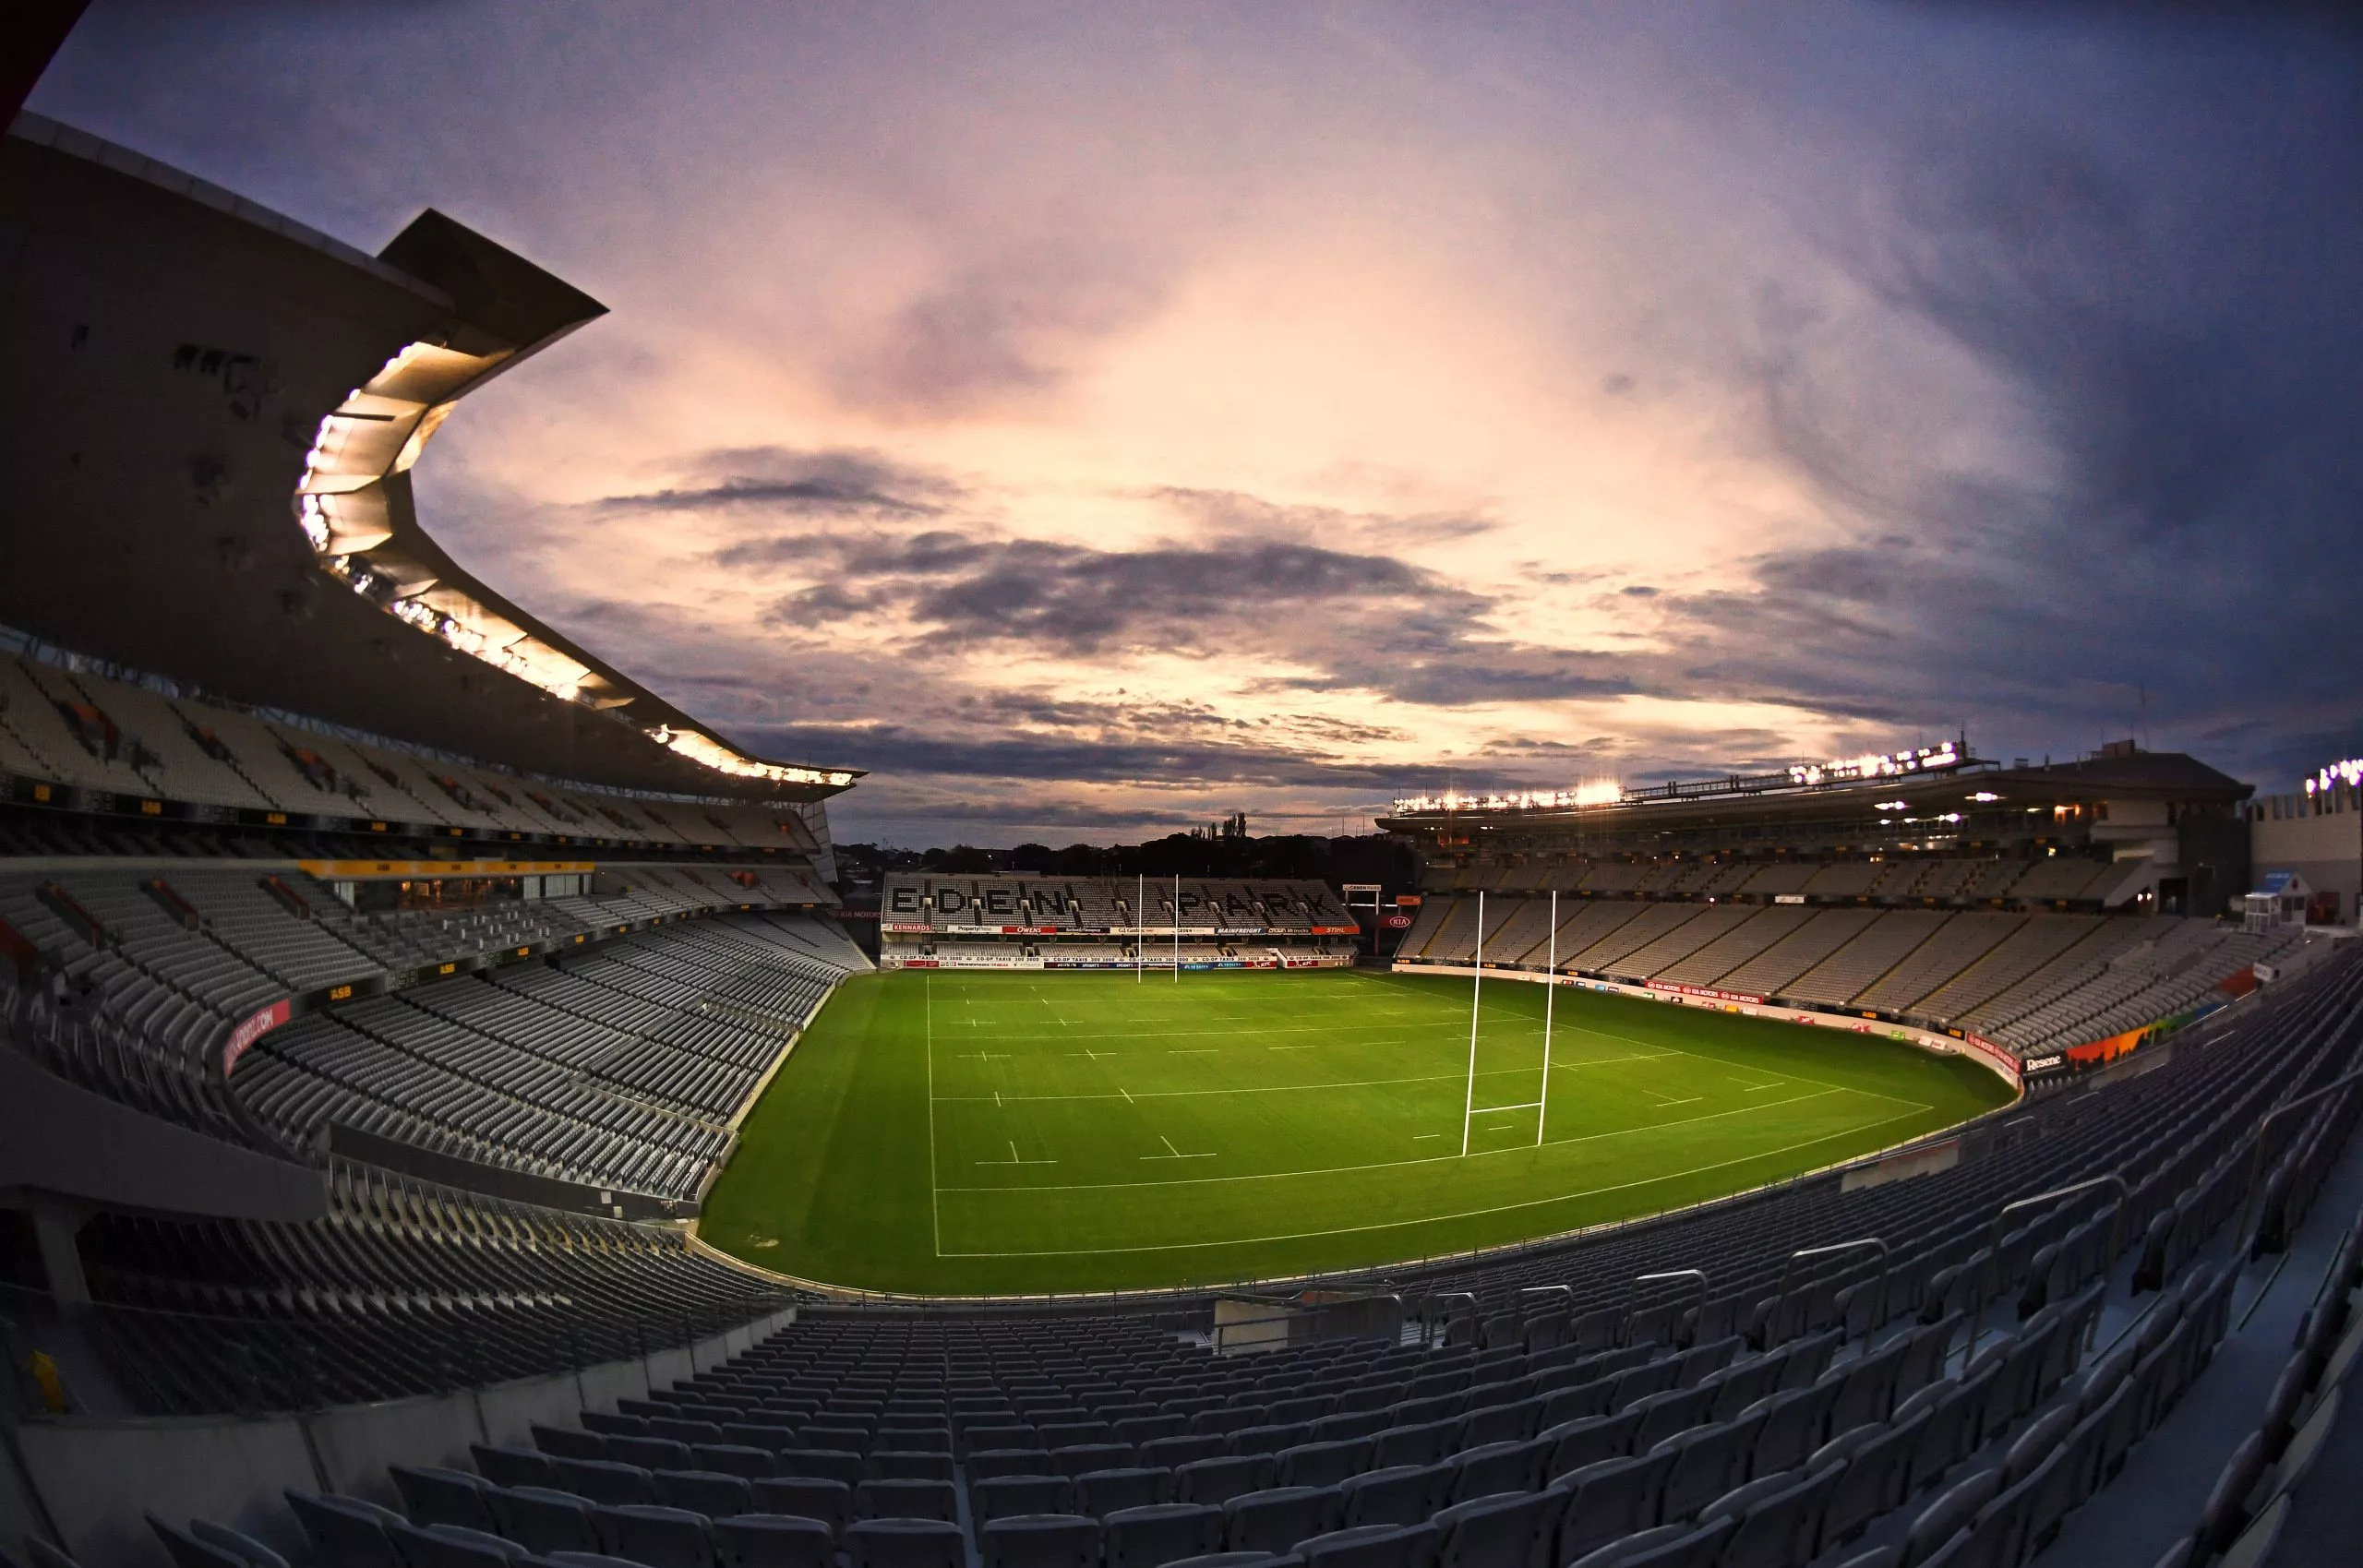 Eden Park in New Zealand, Australia and Oceania | Football,Cricket - Rated 4.4